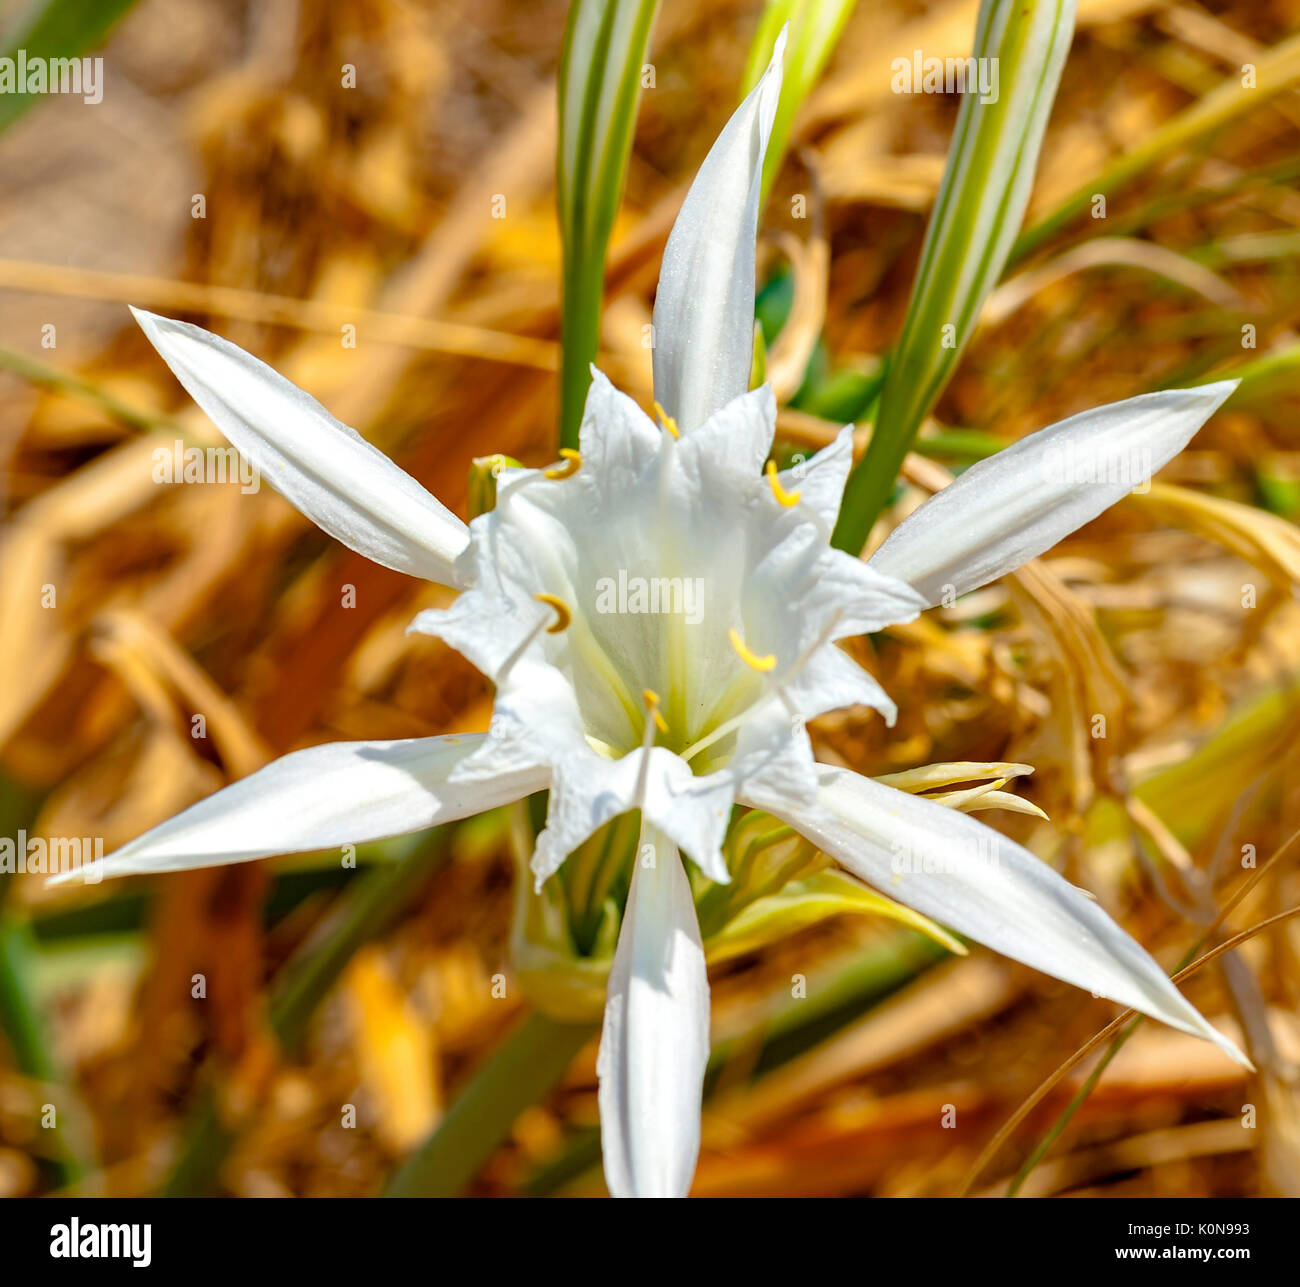 Sea lily, herbaceous plant with white flowers, large and scented, blooming in July and August, on the beach dunes of the park 'Coast Dune' Stock Photo